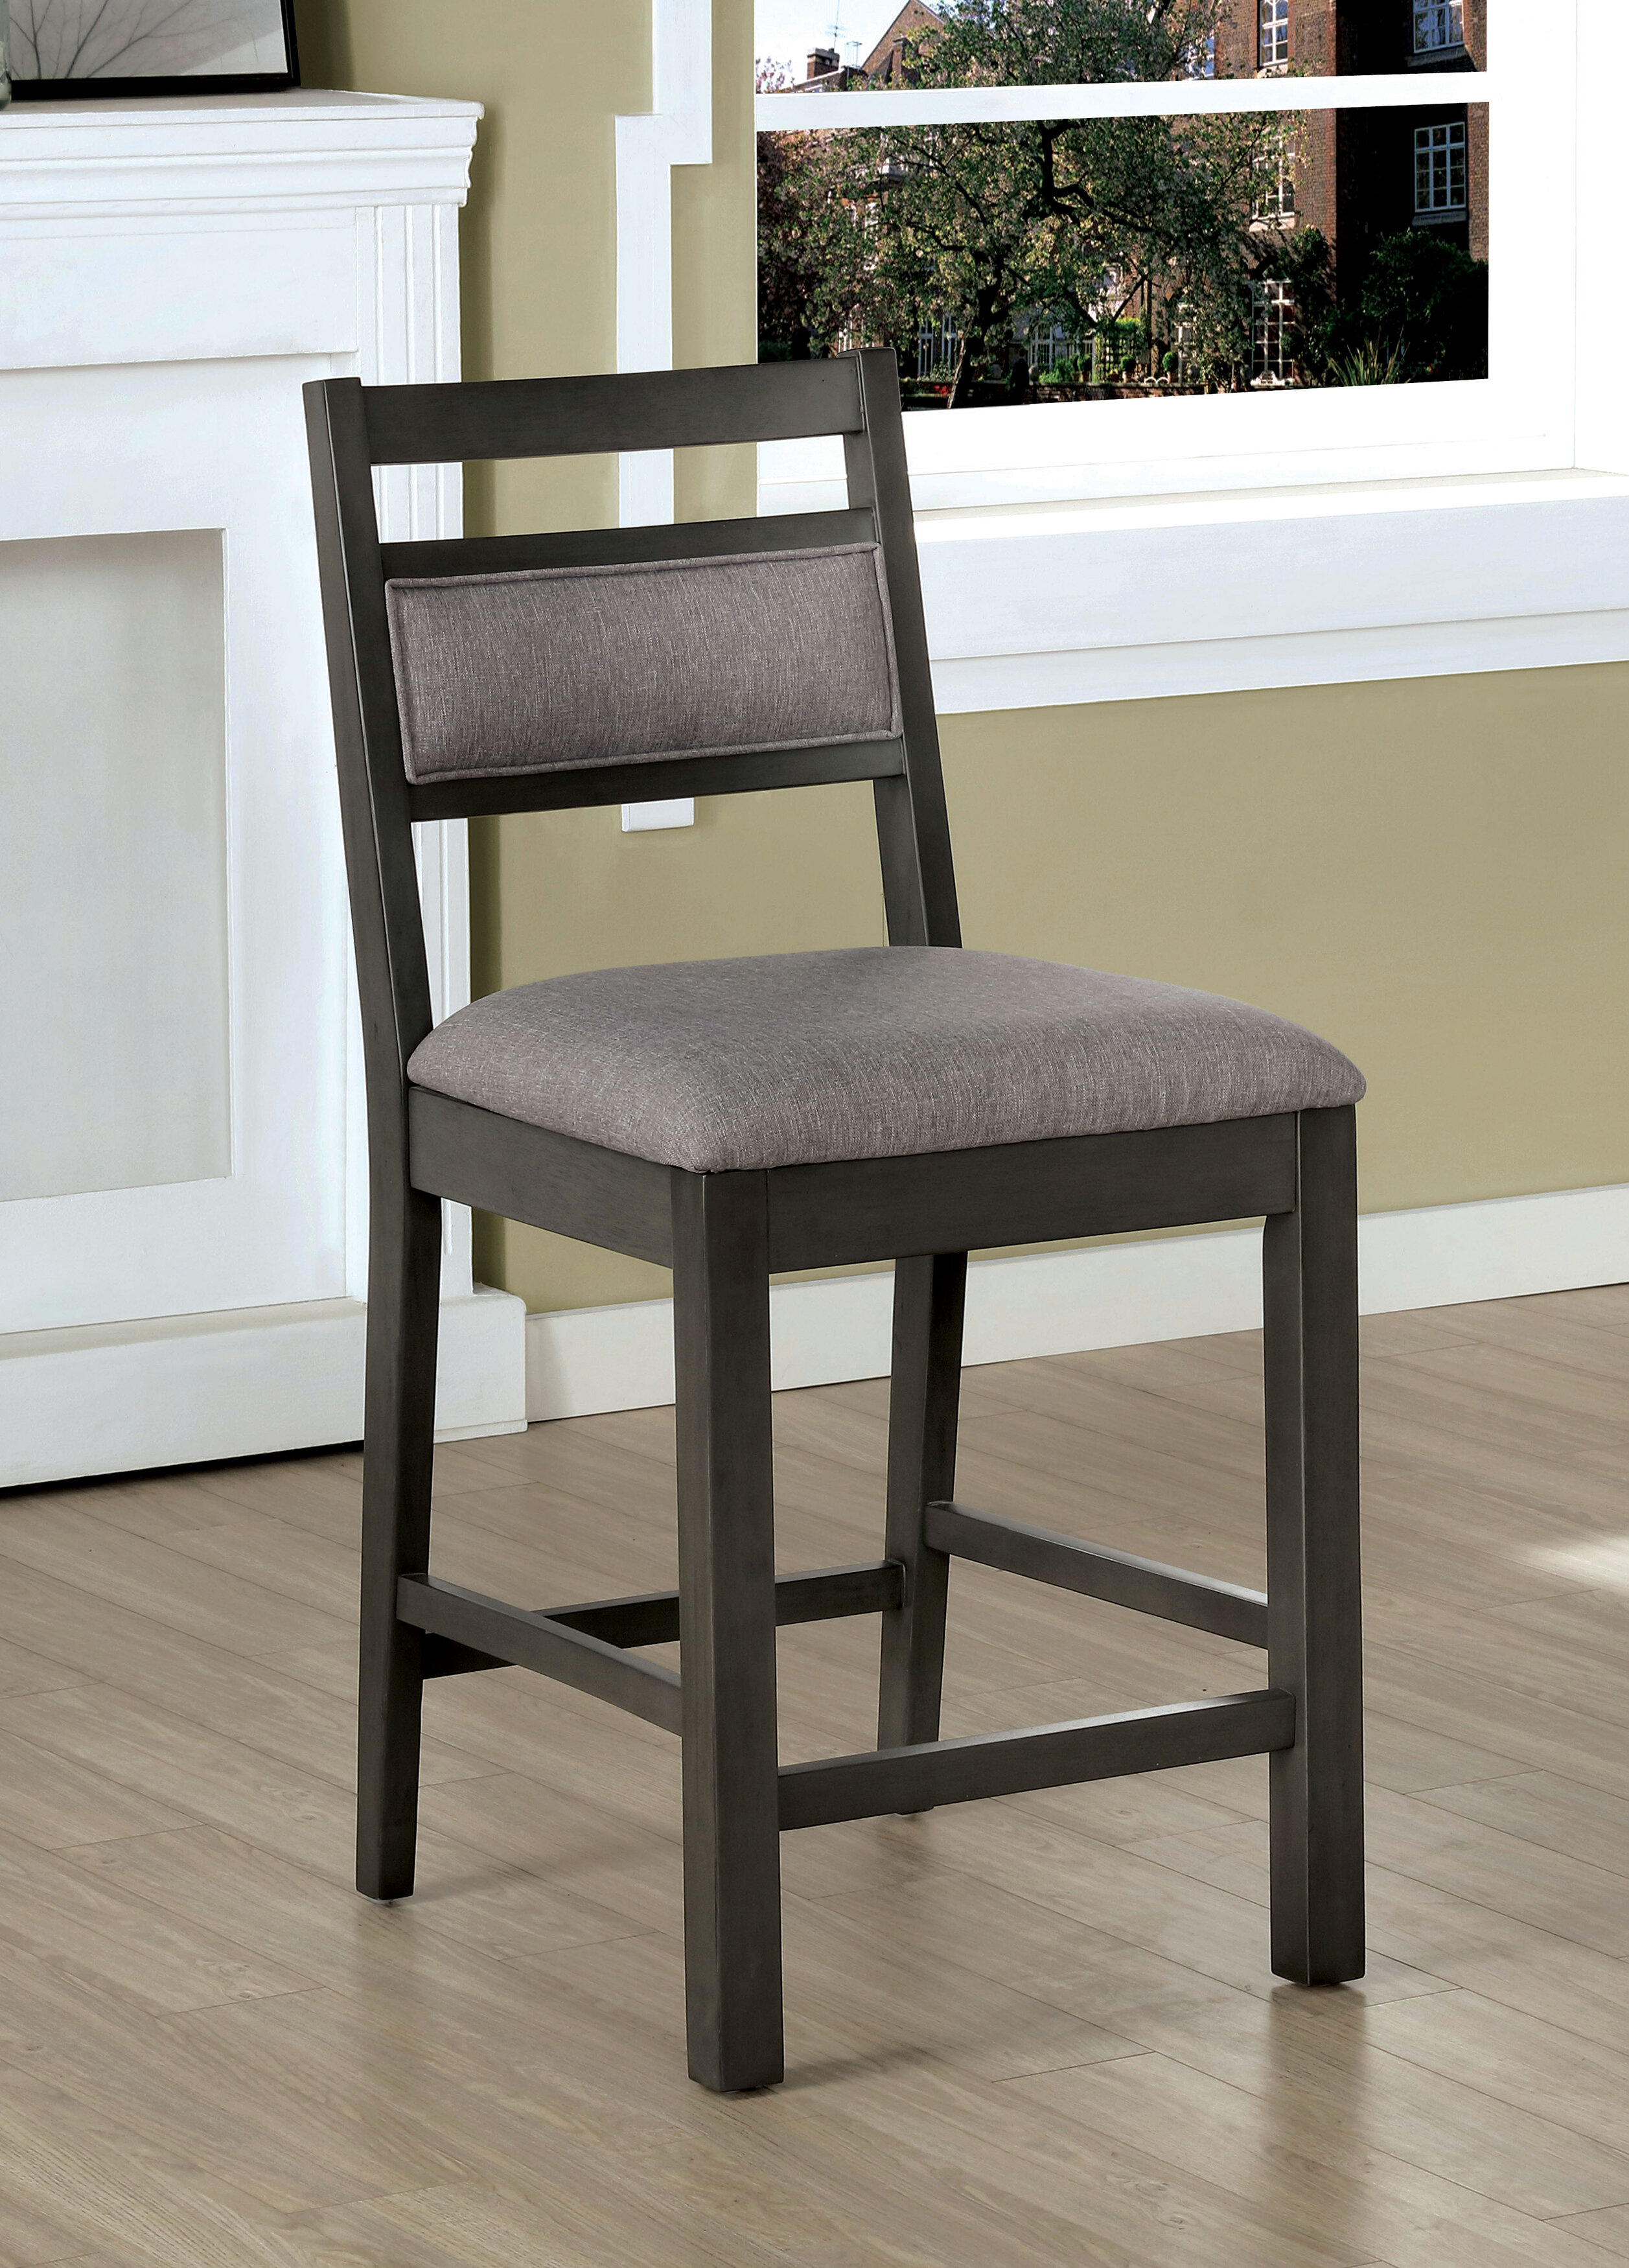 Counter Height Chairs Set Of 2 - Acme Chateau De Ville Counter Height